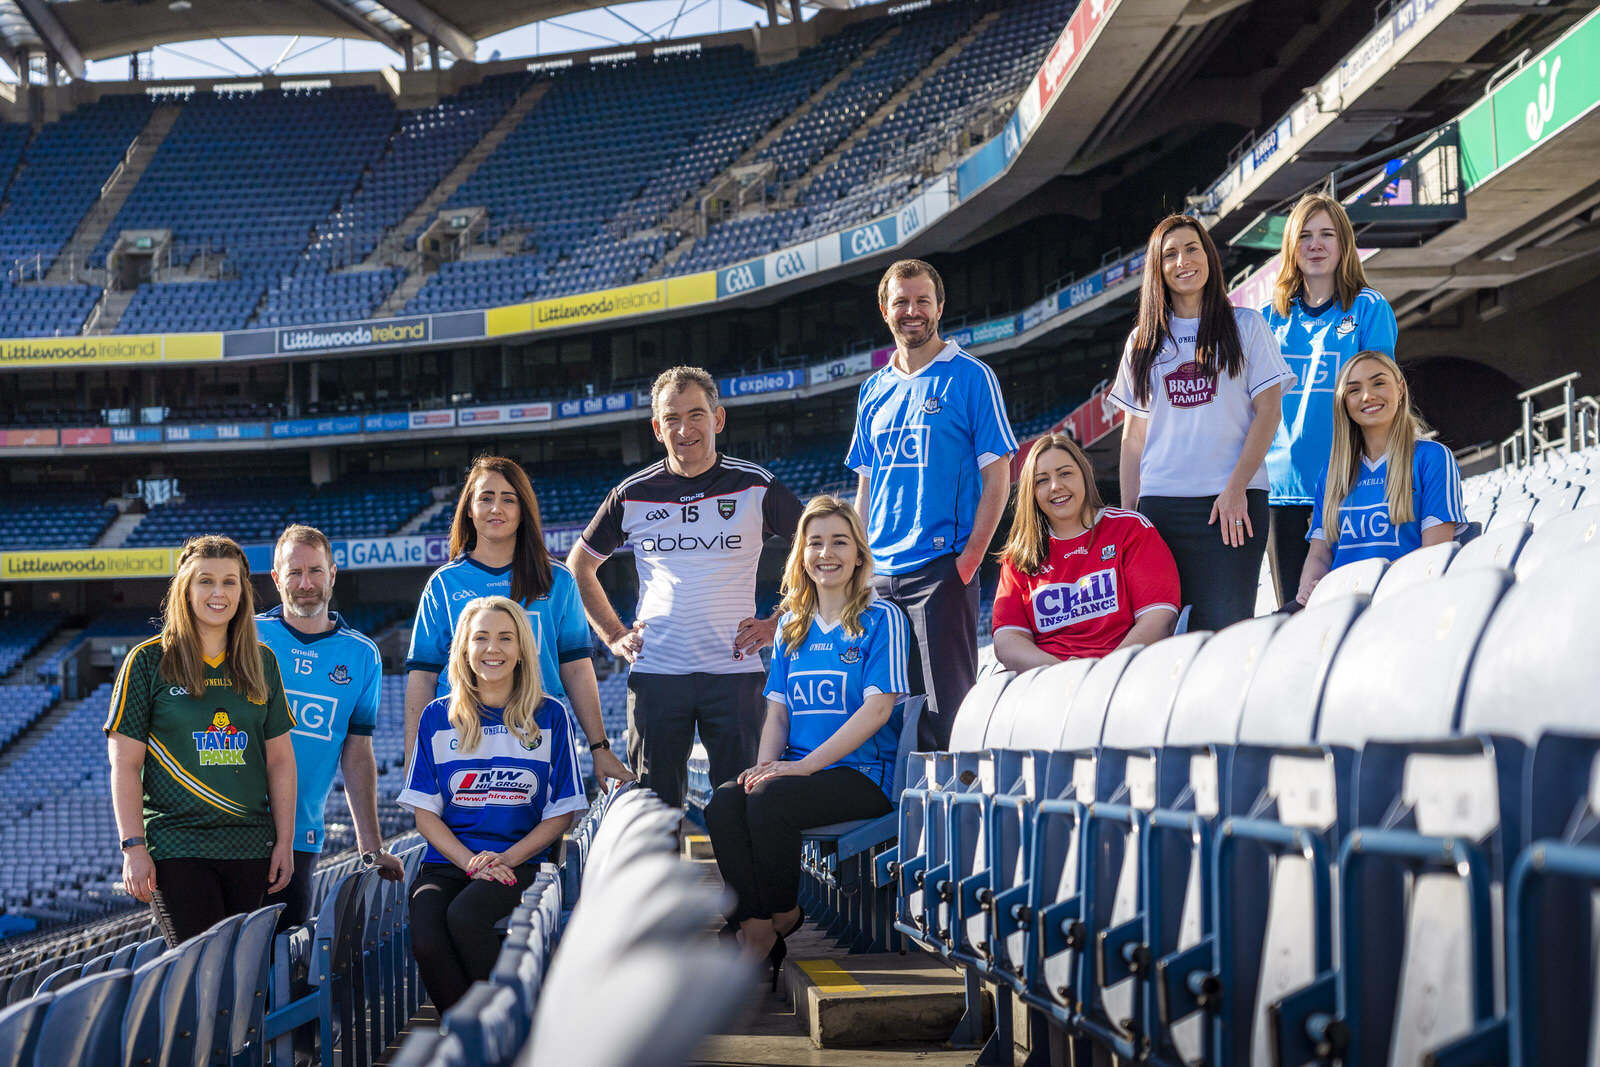  Corporate headshots of Events and Meetings Team Croke Park Dublin Ireland. Roger Kenny Photography.  